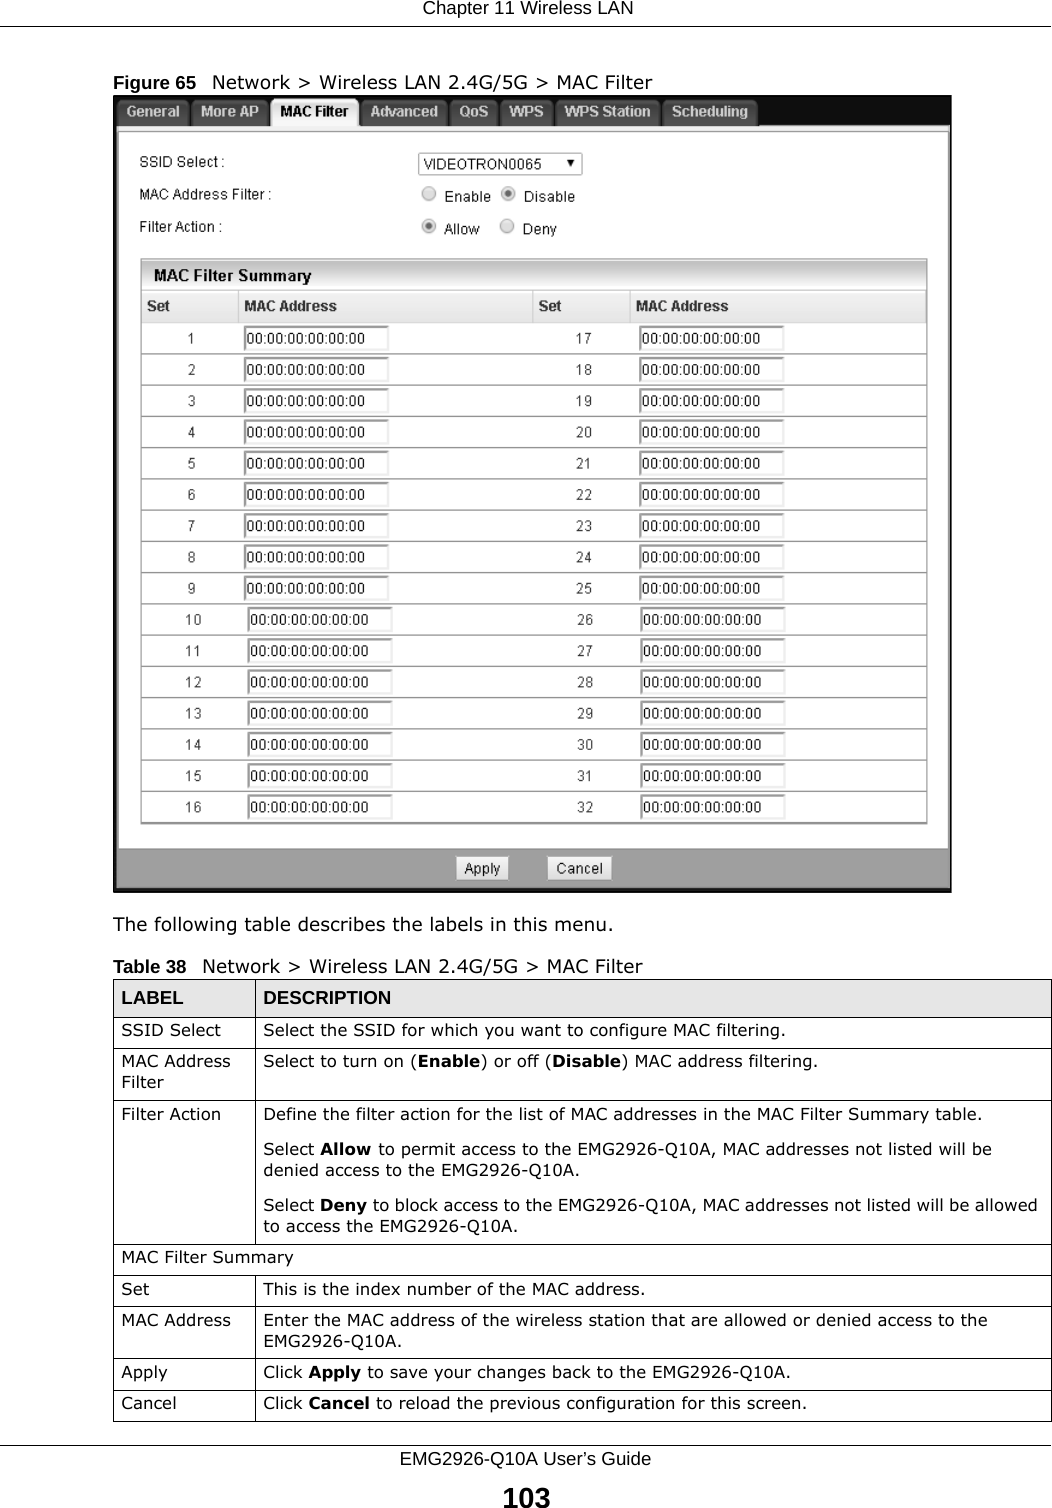  Chapter 11 Wireless LANEMG2926-Q10A User’s Guide103Figure 65   Network &gt; Wireless LAN 2.4G/5G &gt; MAC FilterThe following table describes the labels in this menu.Table 38   Network &gt; Wireless LAN 2.4G/5G &gt; MAC FilterLABEL DESCRIPTIONSSID Select Select the SSID for which you want to configure MAC filtering.MAC Address FilterSelect to turn on (Enable) or off (Disable) MAC address filtering.Filter Action Define the filter action for the list of MAC addresses in the MAC Filter Summary table.Select Allow to permit access to the EMG2926-Q10A, MAC addresses not listed will be denied access to the EMG2926-Q10A. Select Deny to block access to the EMG2926-Q10A, MAC addresses not listed will be allowed to access the EMG2926-Q10A. MAC Filter SummarySet This is the index number of the MAC address.MAC Address Enter the MAC address of the wireless station that are allowed or denied access to the EMG2926-Q10A.Apply Click Apply to save your changes back to the EMG2926-Q10A.Cancel Click Cancel to reload the previous configuration for this screen.